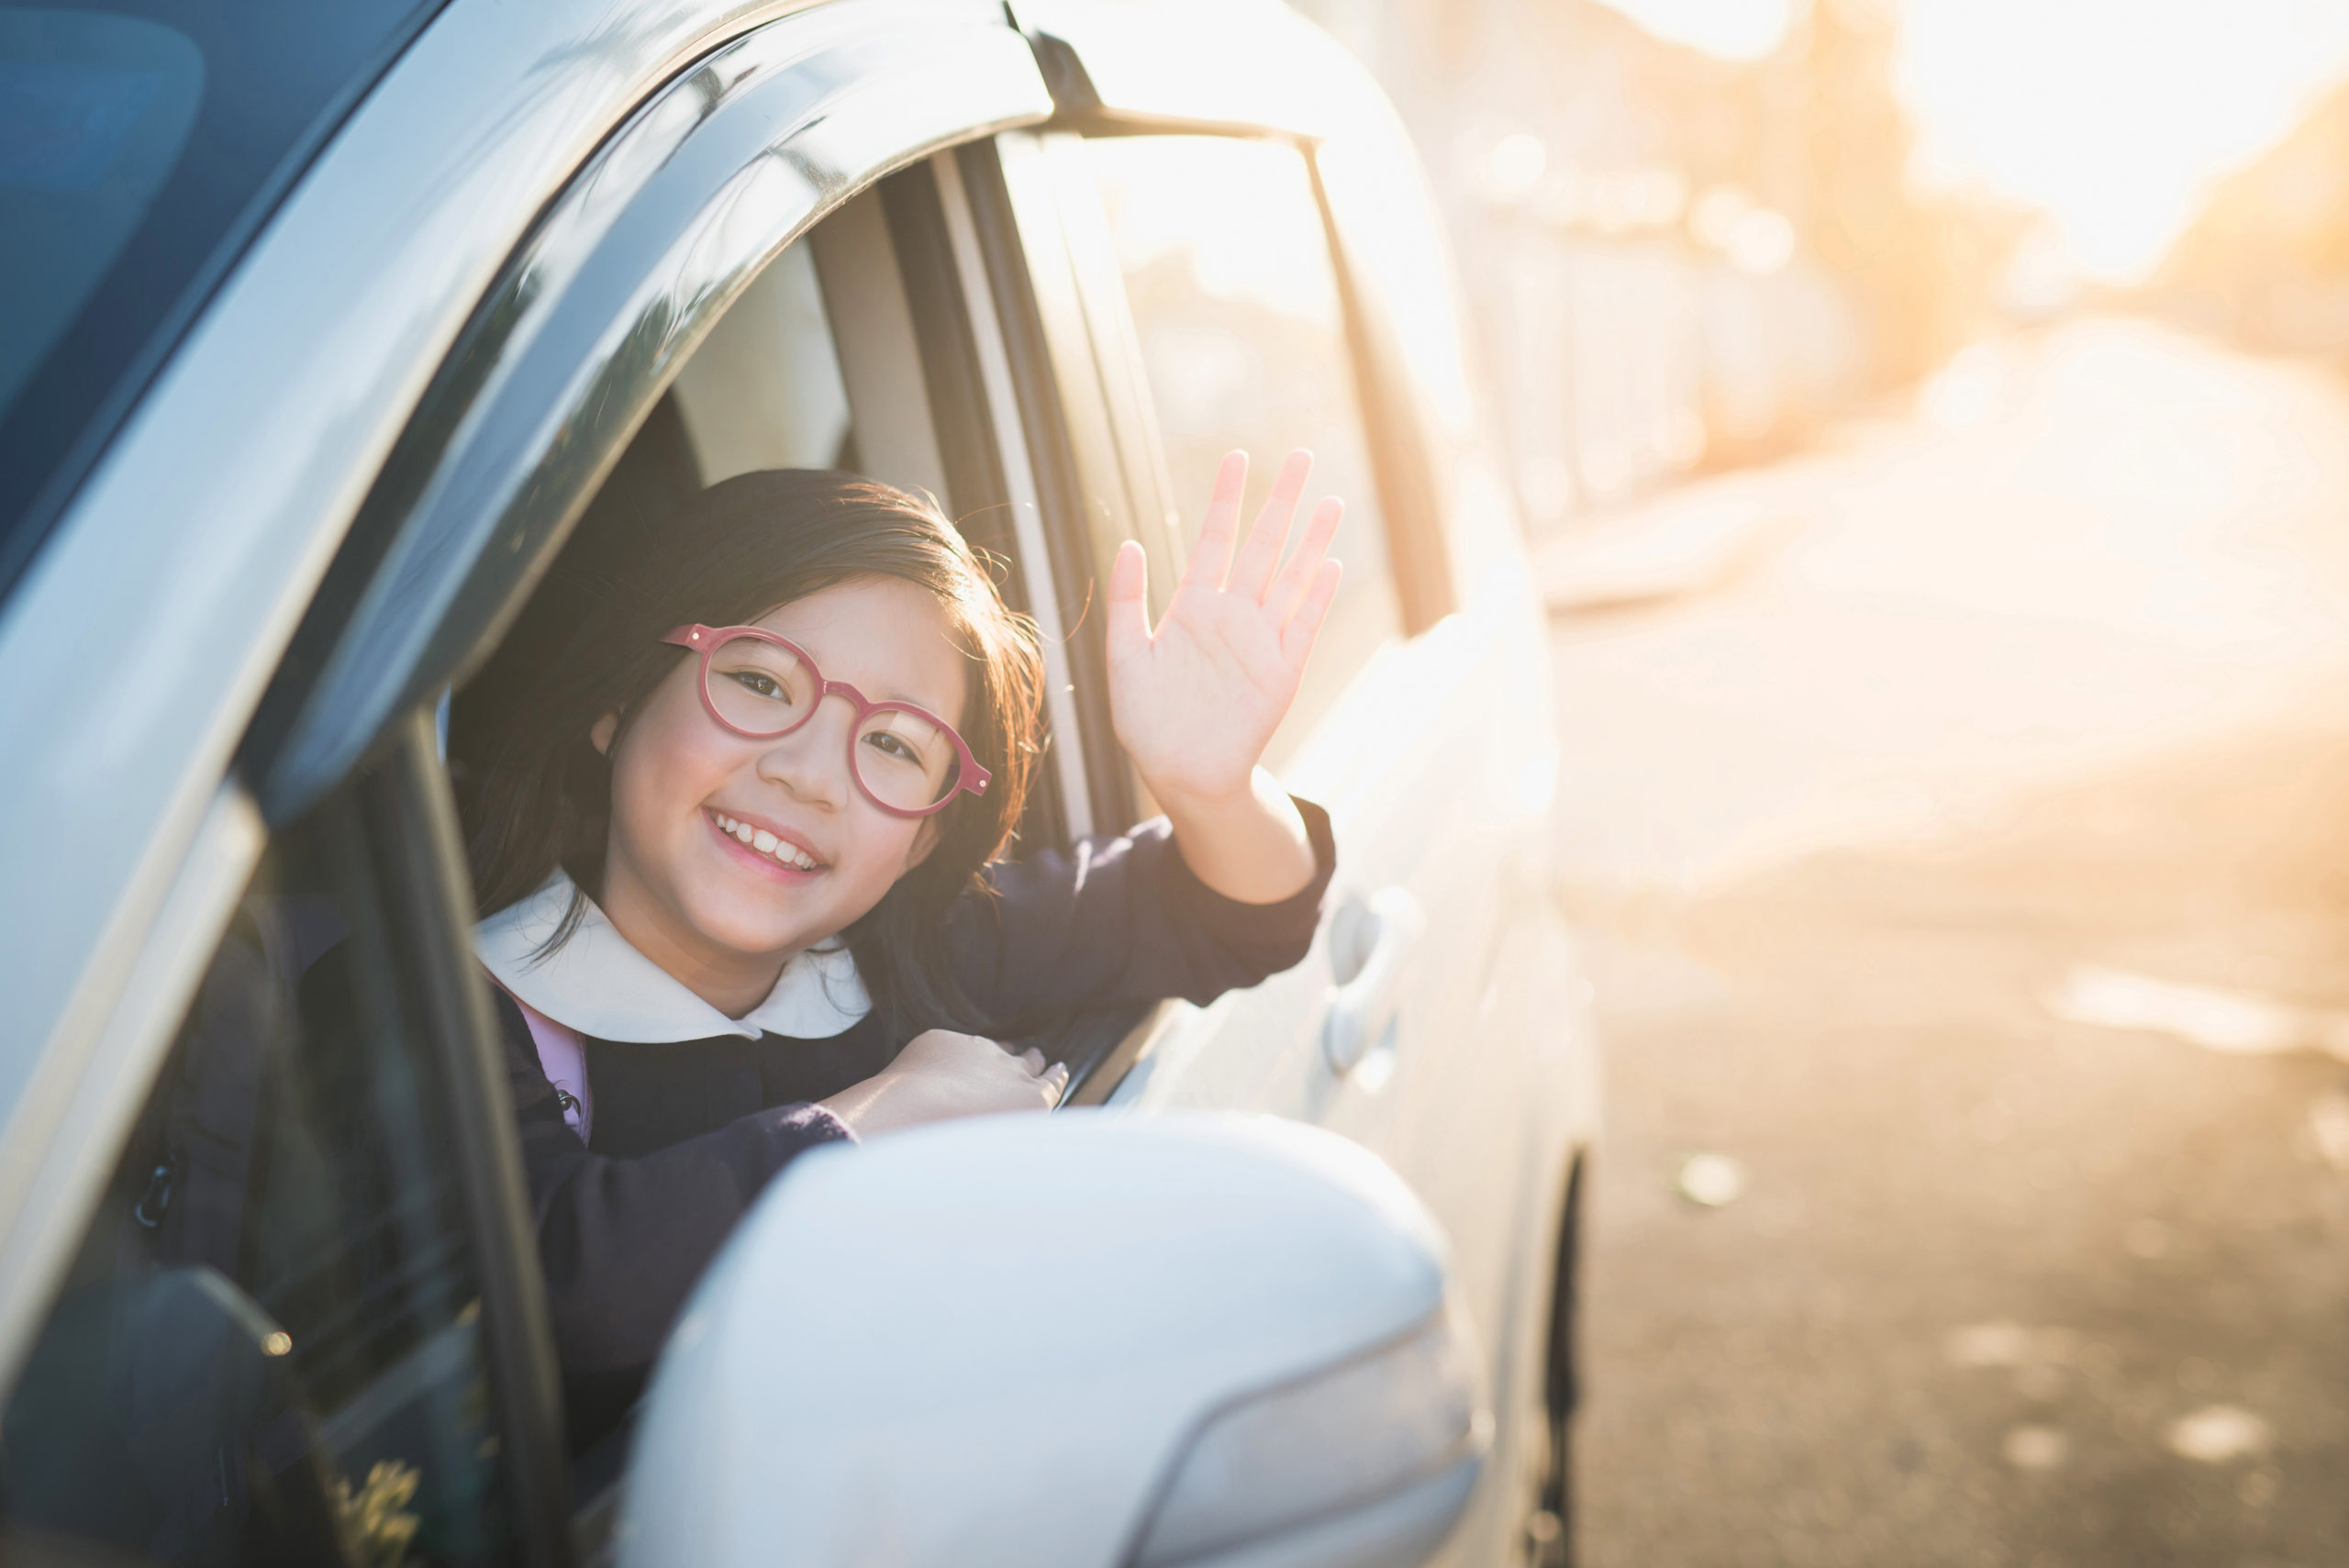 Asian girl in student uniform going to school by car and  waving goodbye